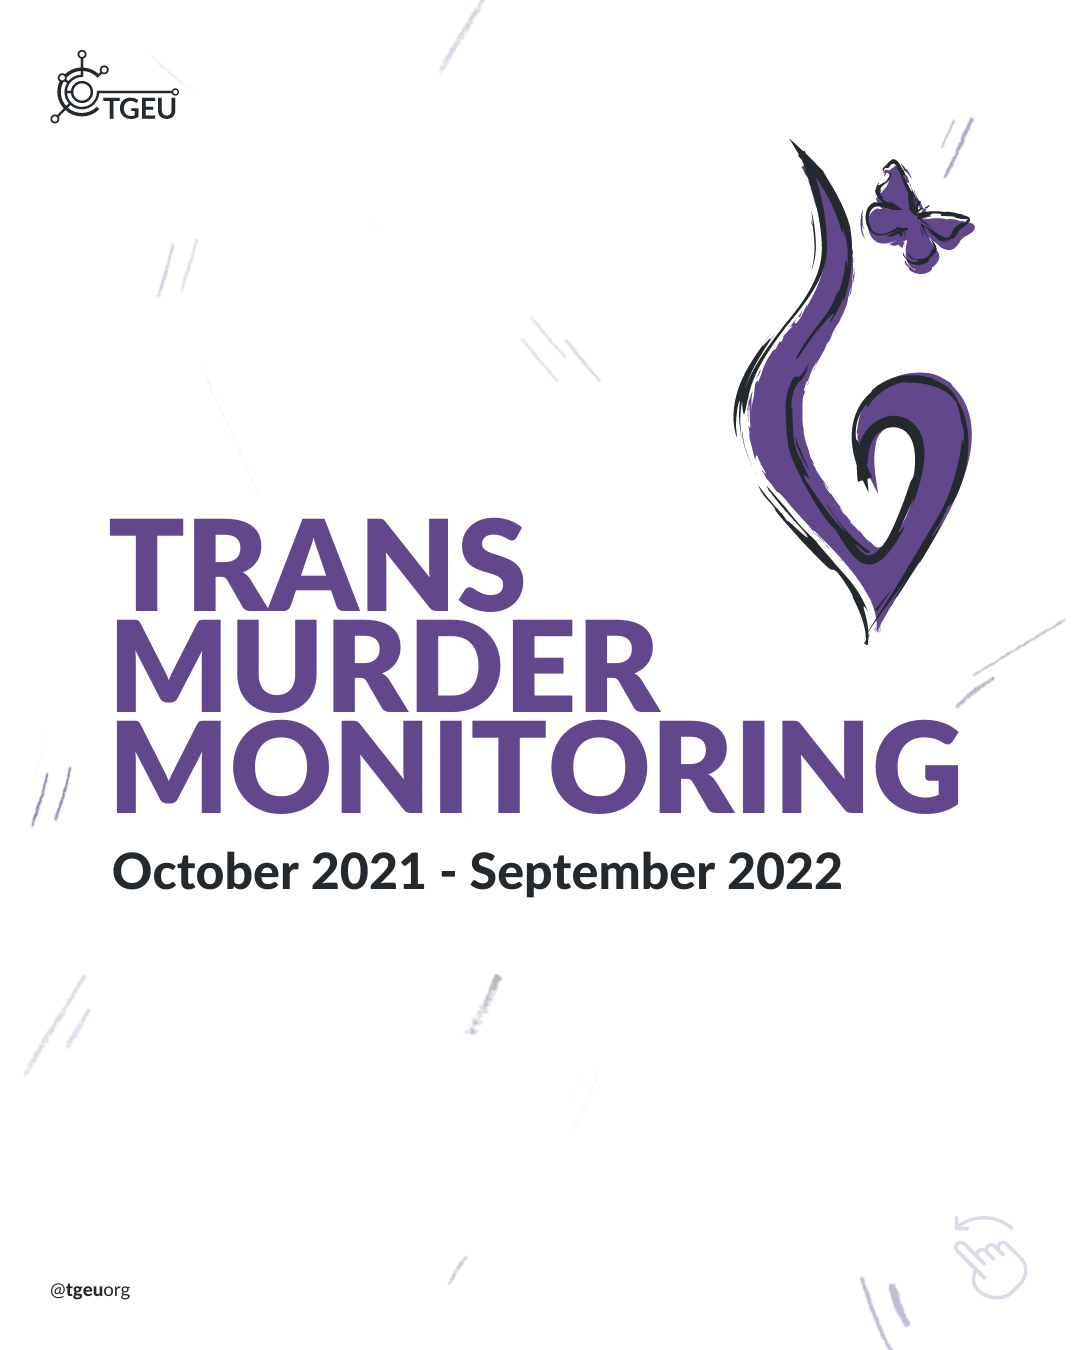 A text in purple saying Trans Murder Monitoring